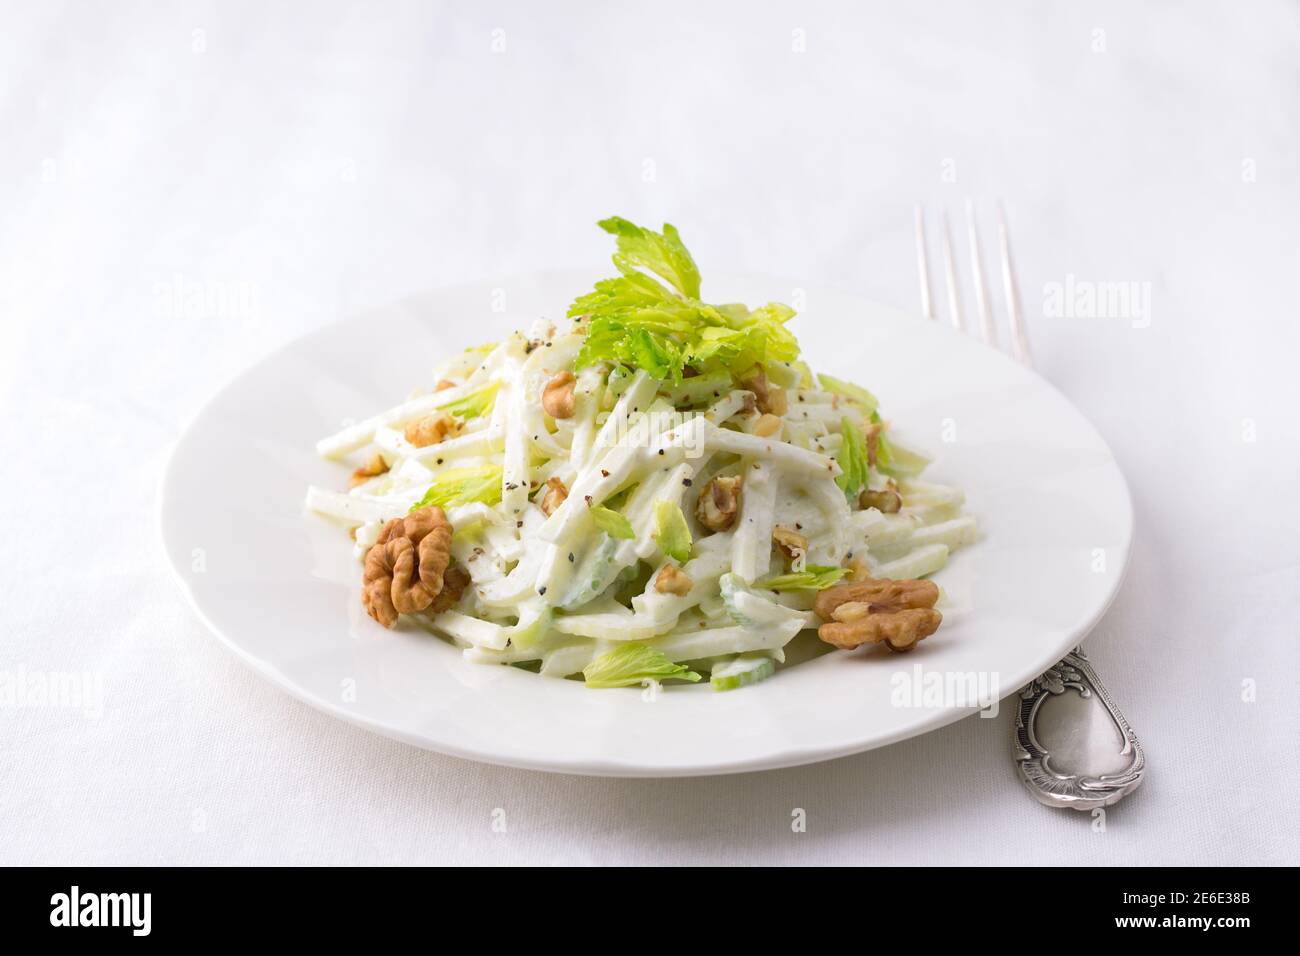 Traditional Waldorf salad with celery, apple, walnut and yoghurt dressing on white background, selective focus, horizontal Stock Photo